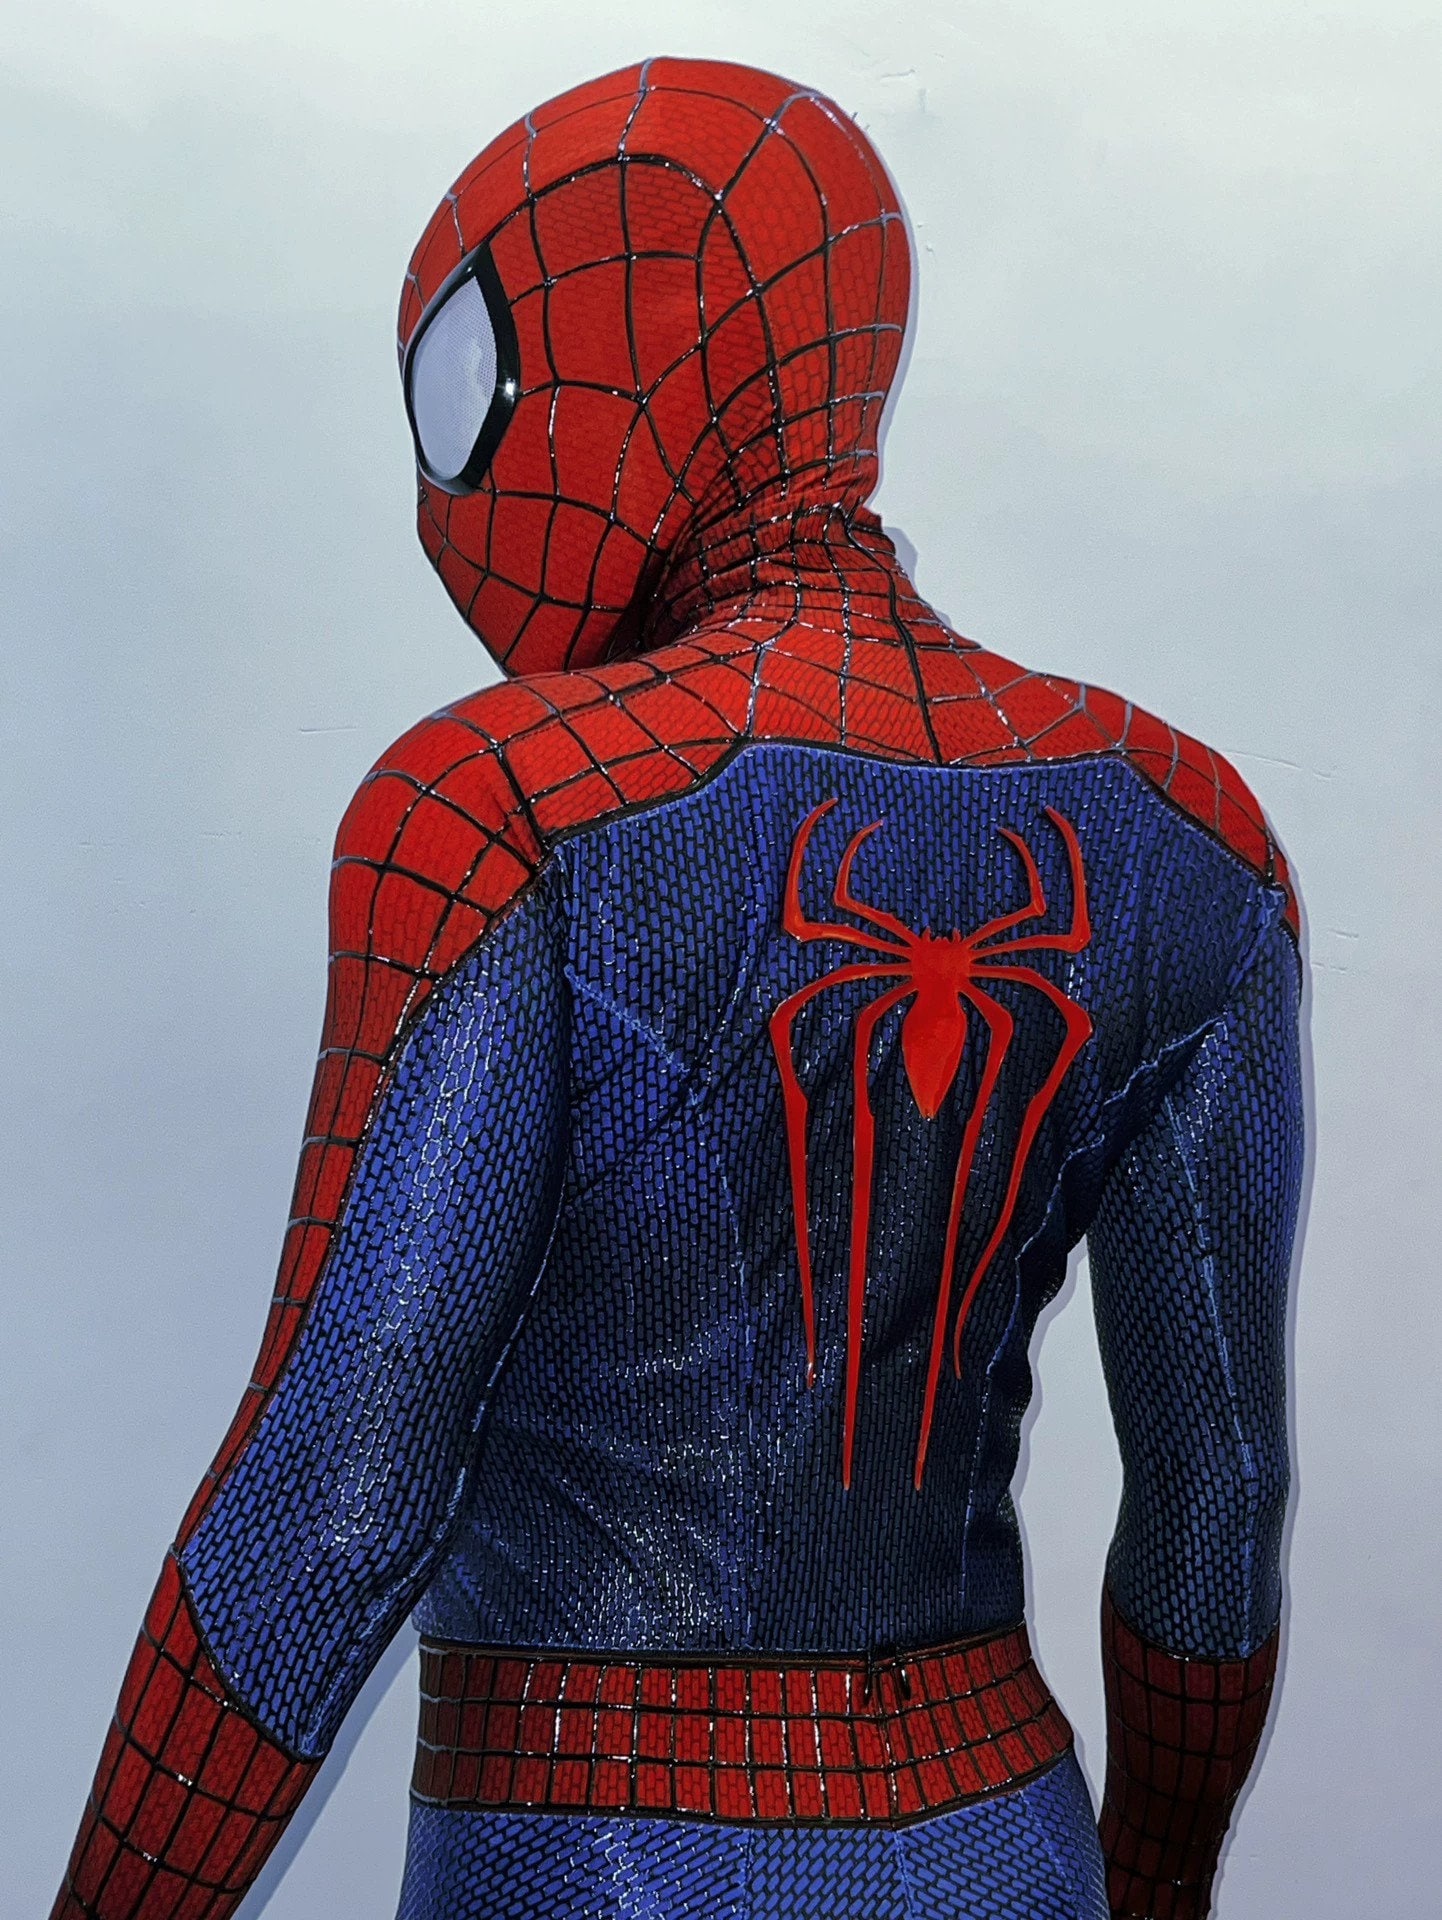 SELF] Can't wait to do a photoshoot in this. PS5 Spiderman 2